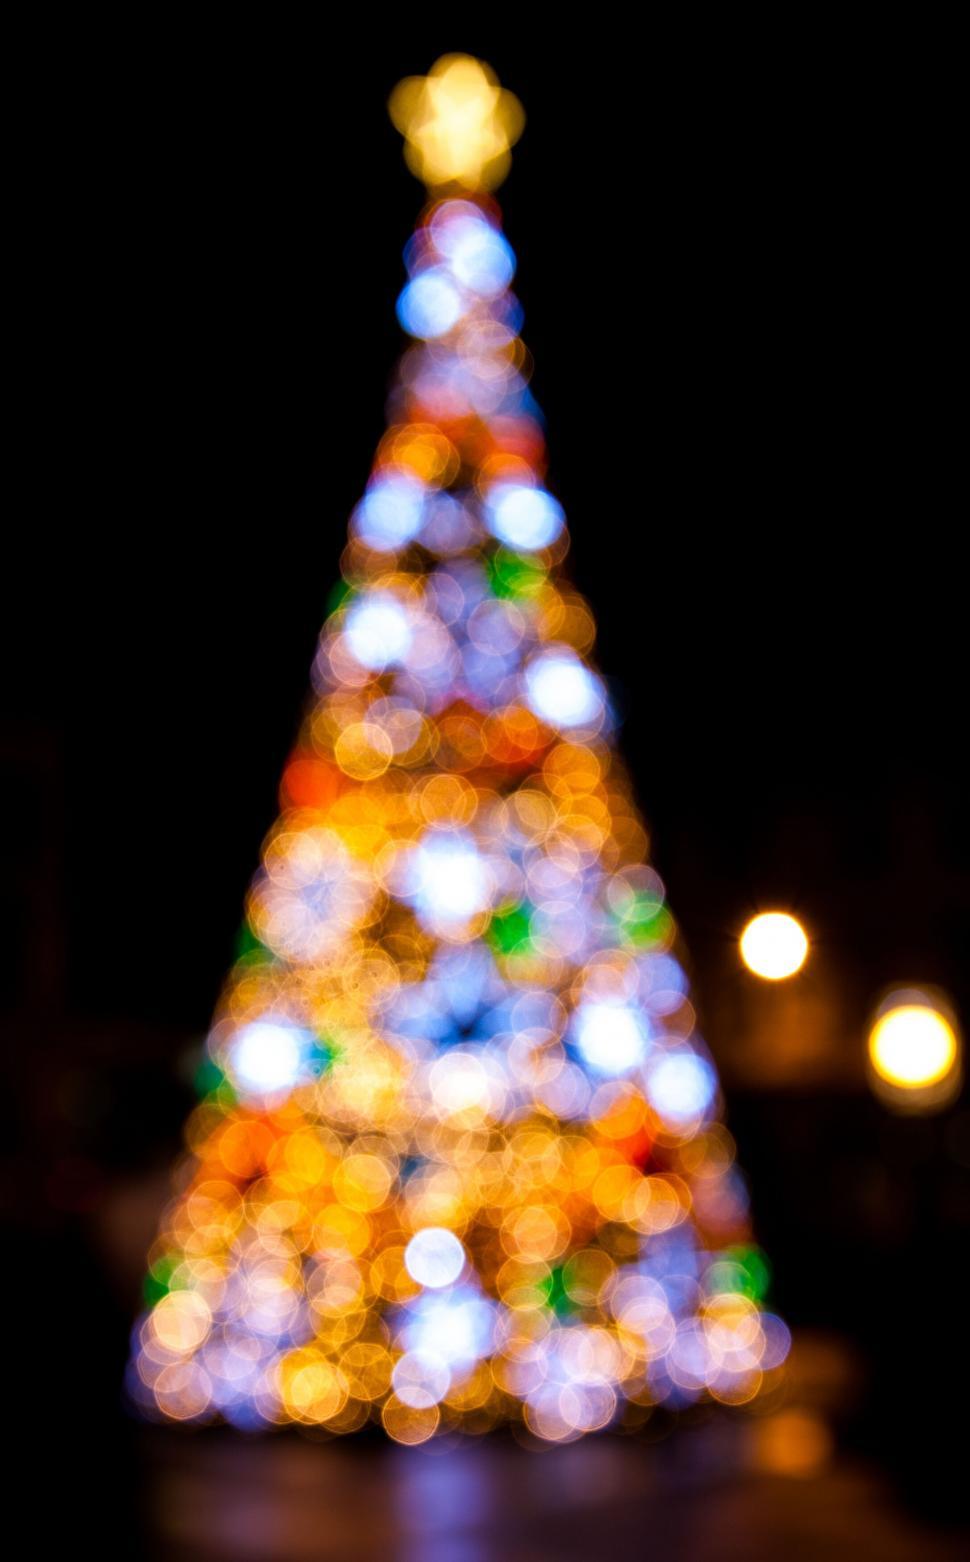 Free Image of Blurred image of a sparkling Christmas tree 